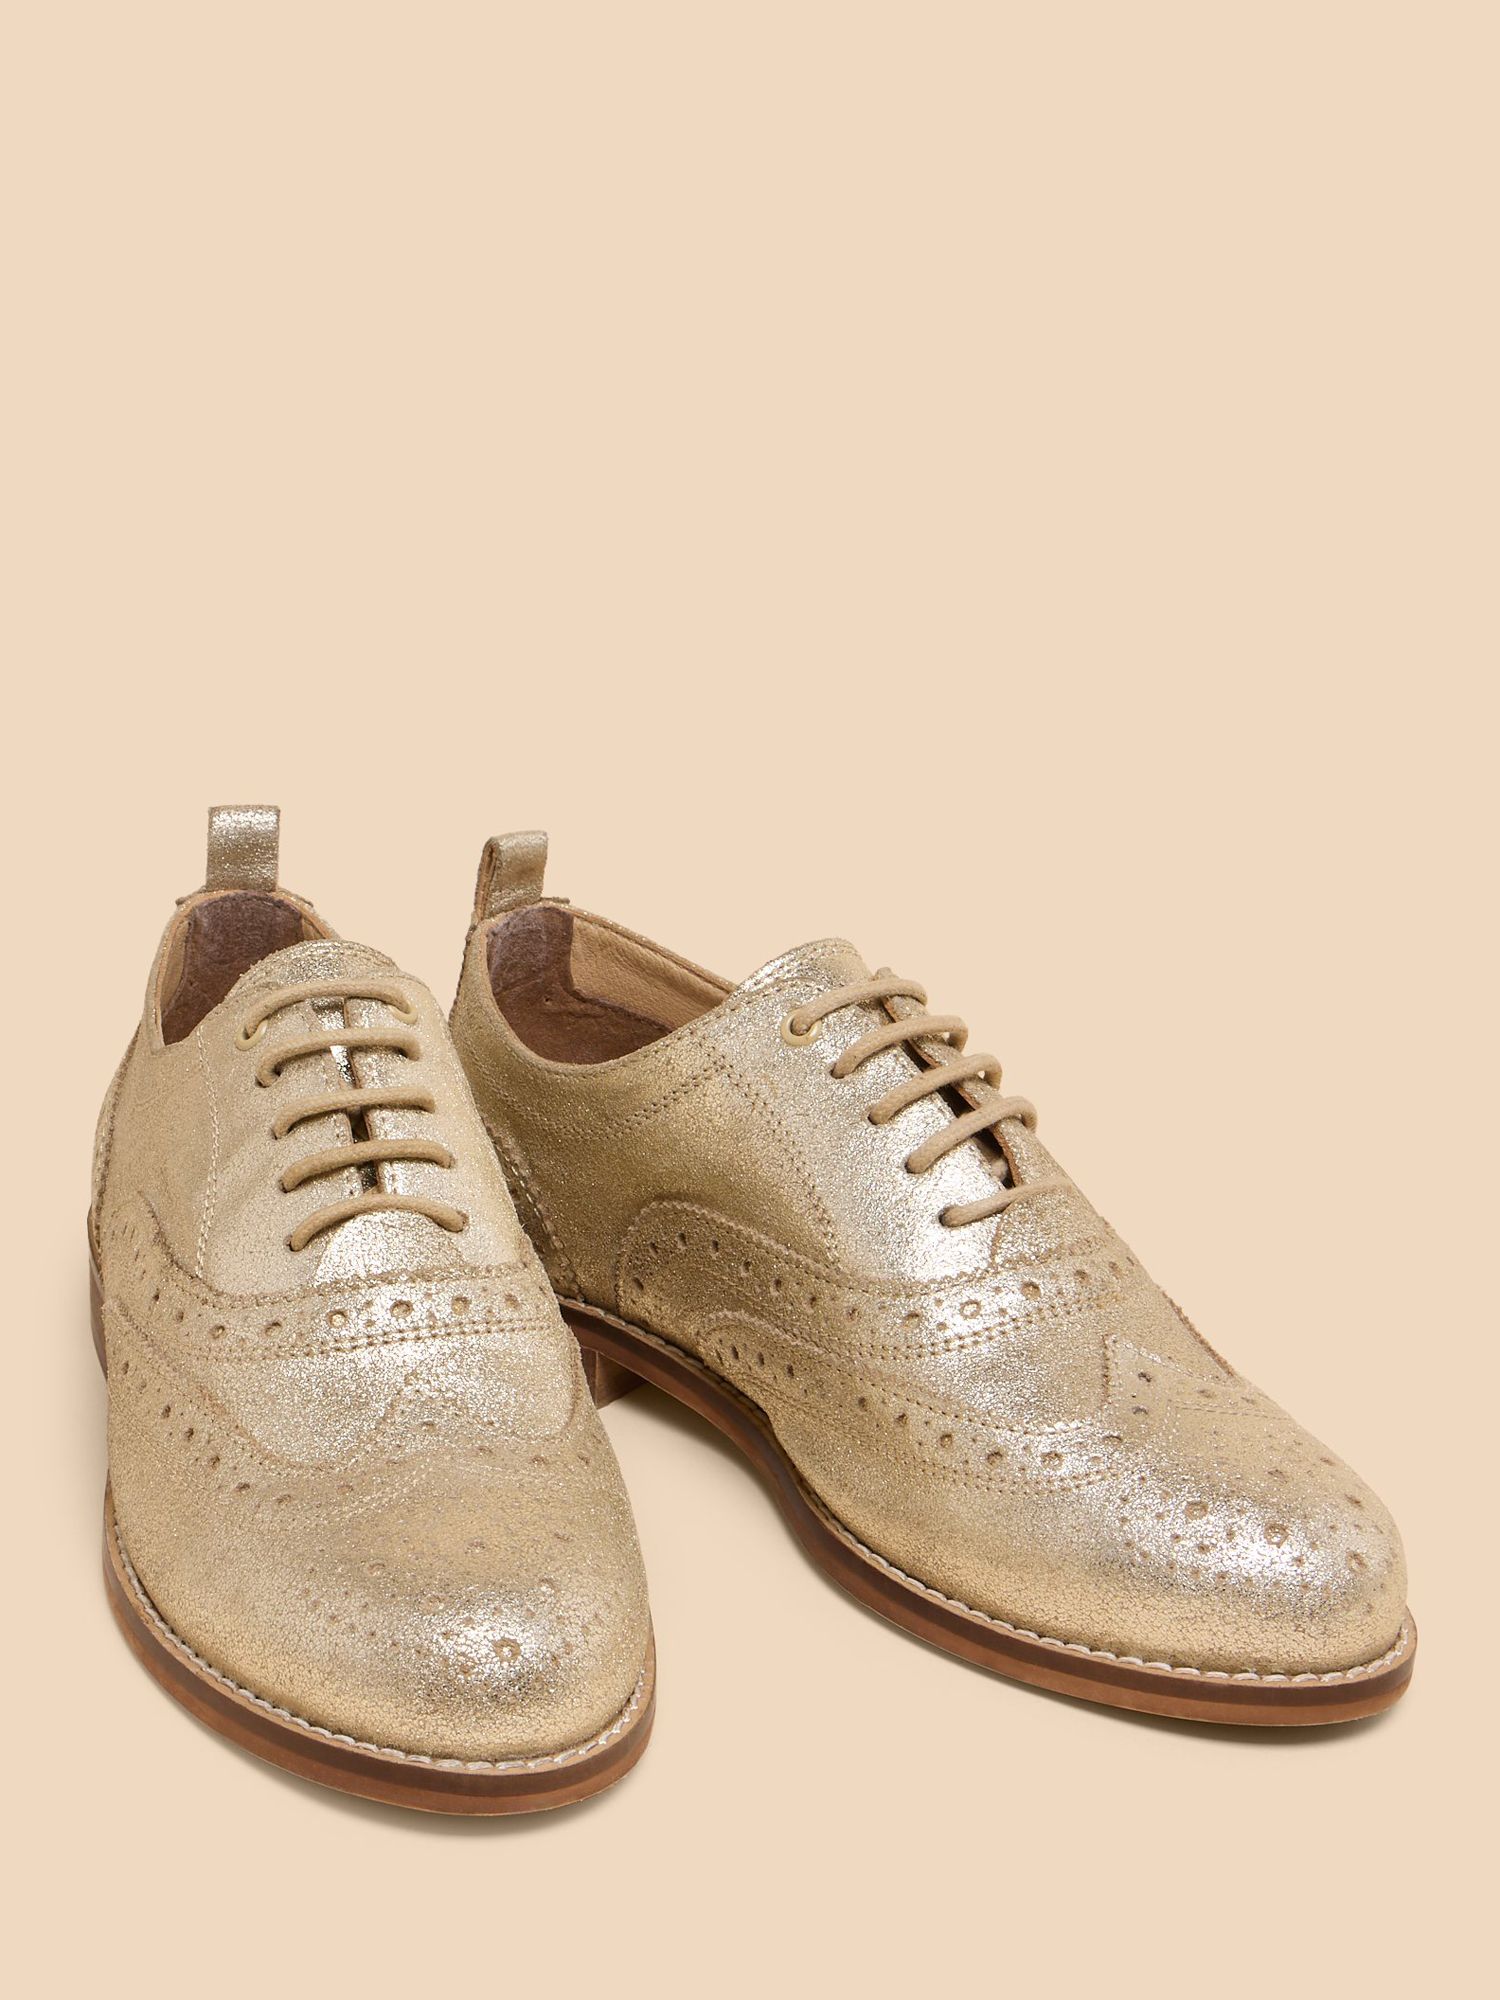 Buy White Stuff Lace Up Leather Brogues Online at johnlewis.com